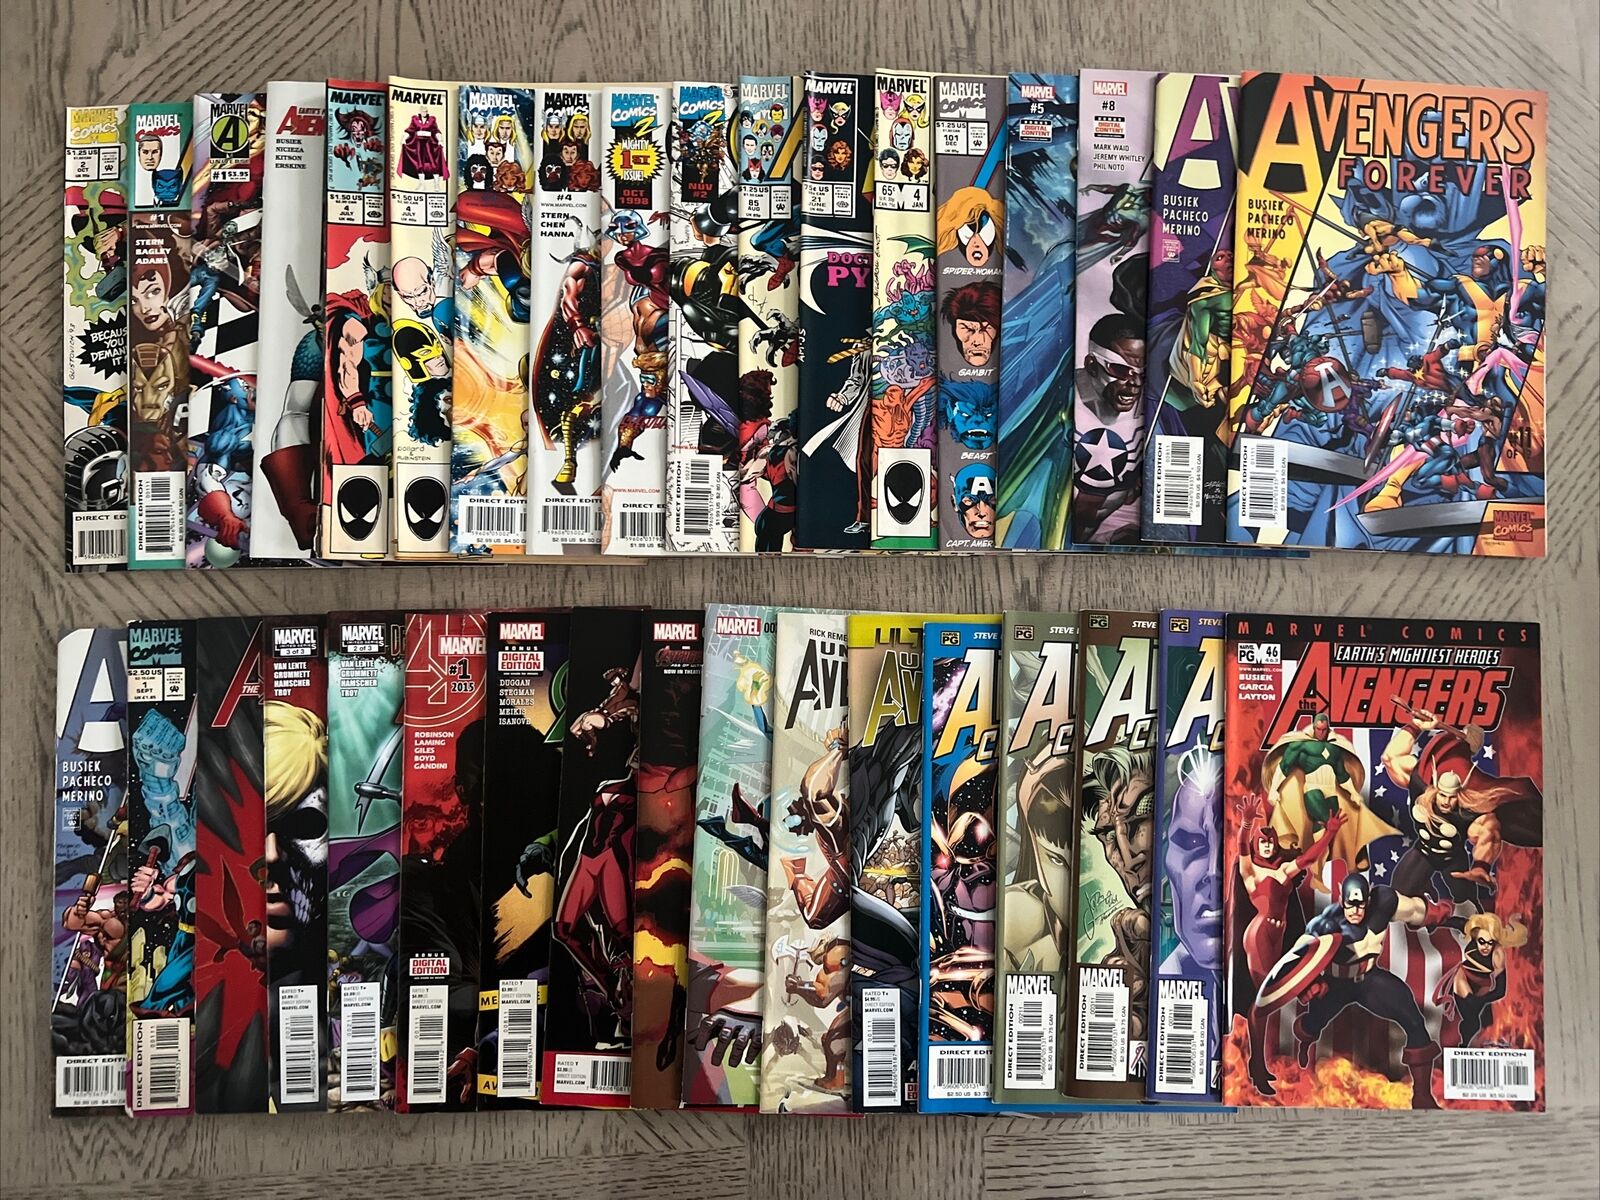 Mixed Lot Of 35 Avengers Uncanny, West Coast, Forever, Celestial Quest And More